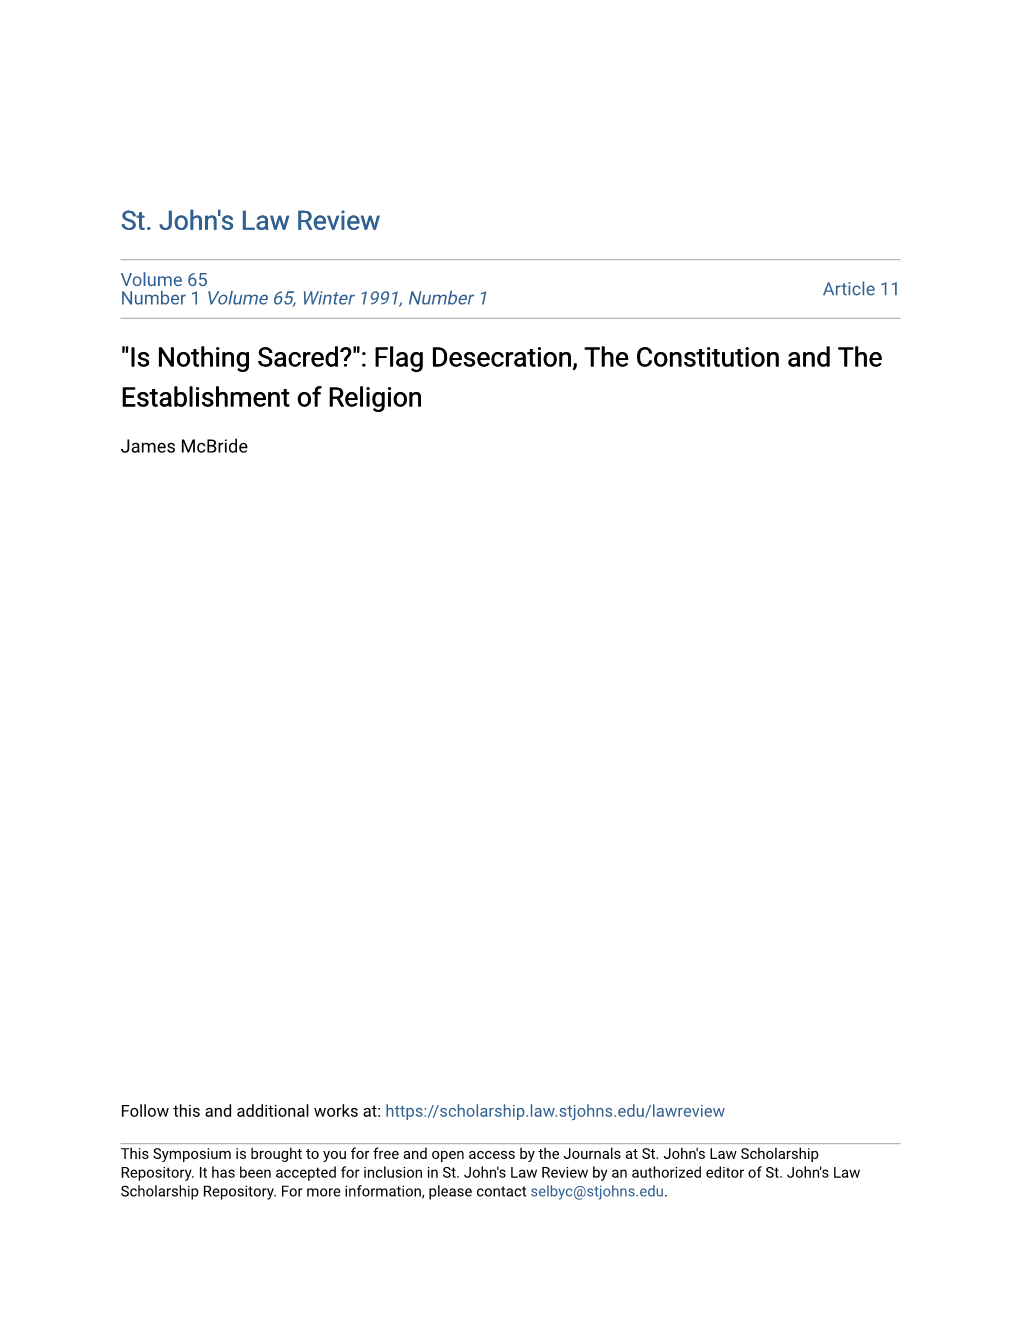 "Is Nothing Sacred?": Flag Desecration, the Constitution and the Establishment of Religion